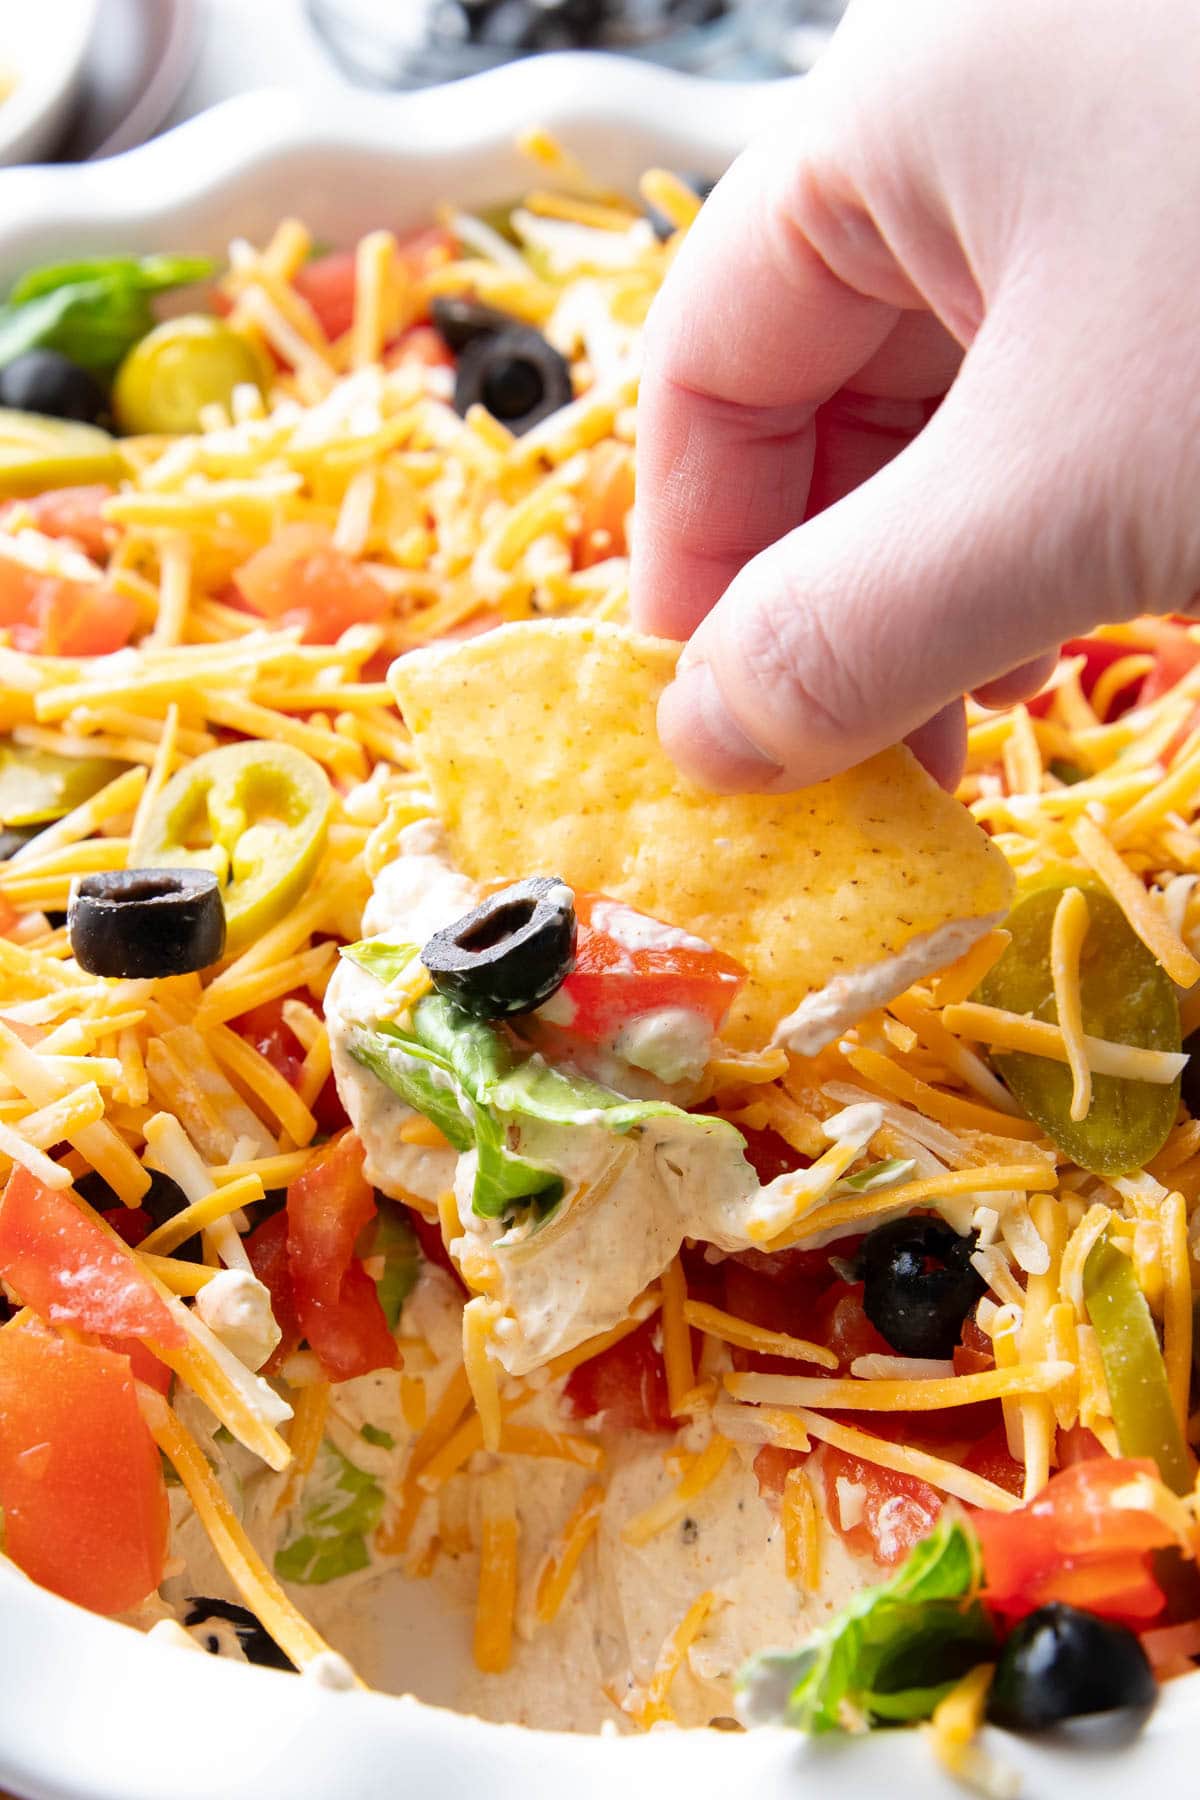 A hand dipping a tortilla chip into this layered taco dip and retrieving cream cheese seasoned dip with a black olive, lettuce, tomatoes, and cheese